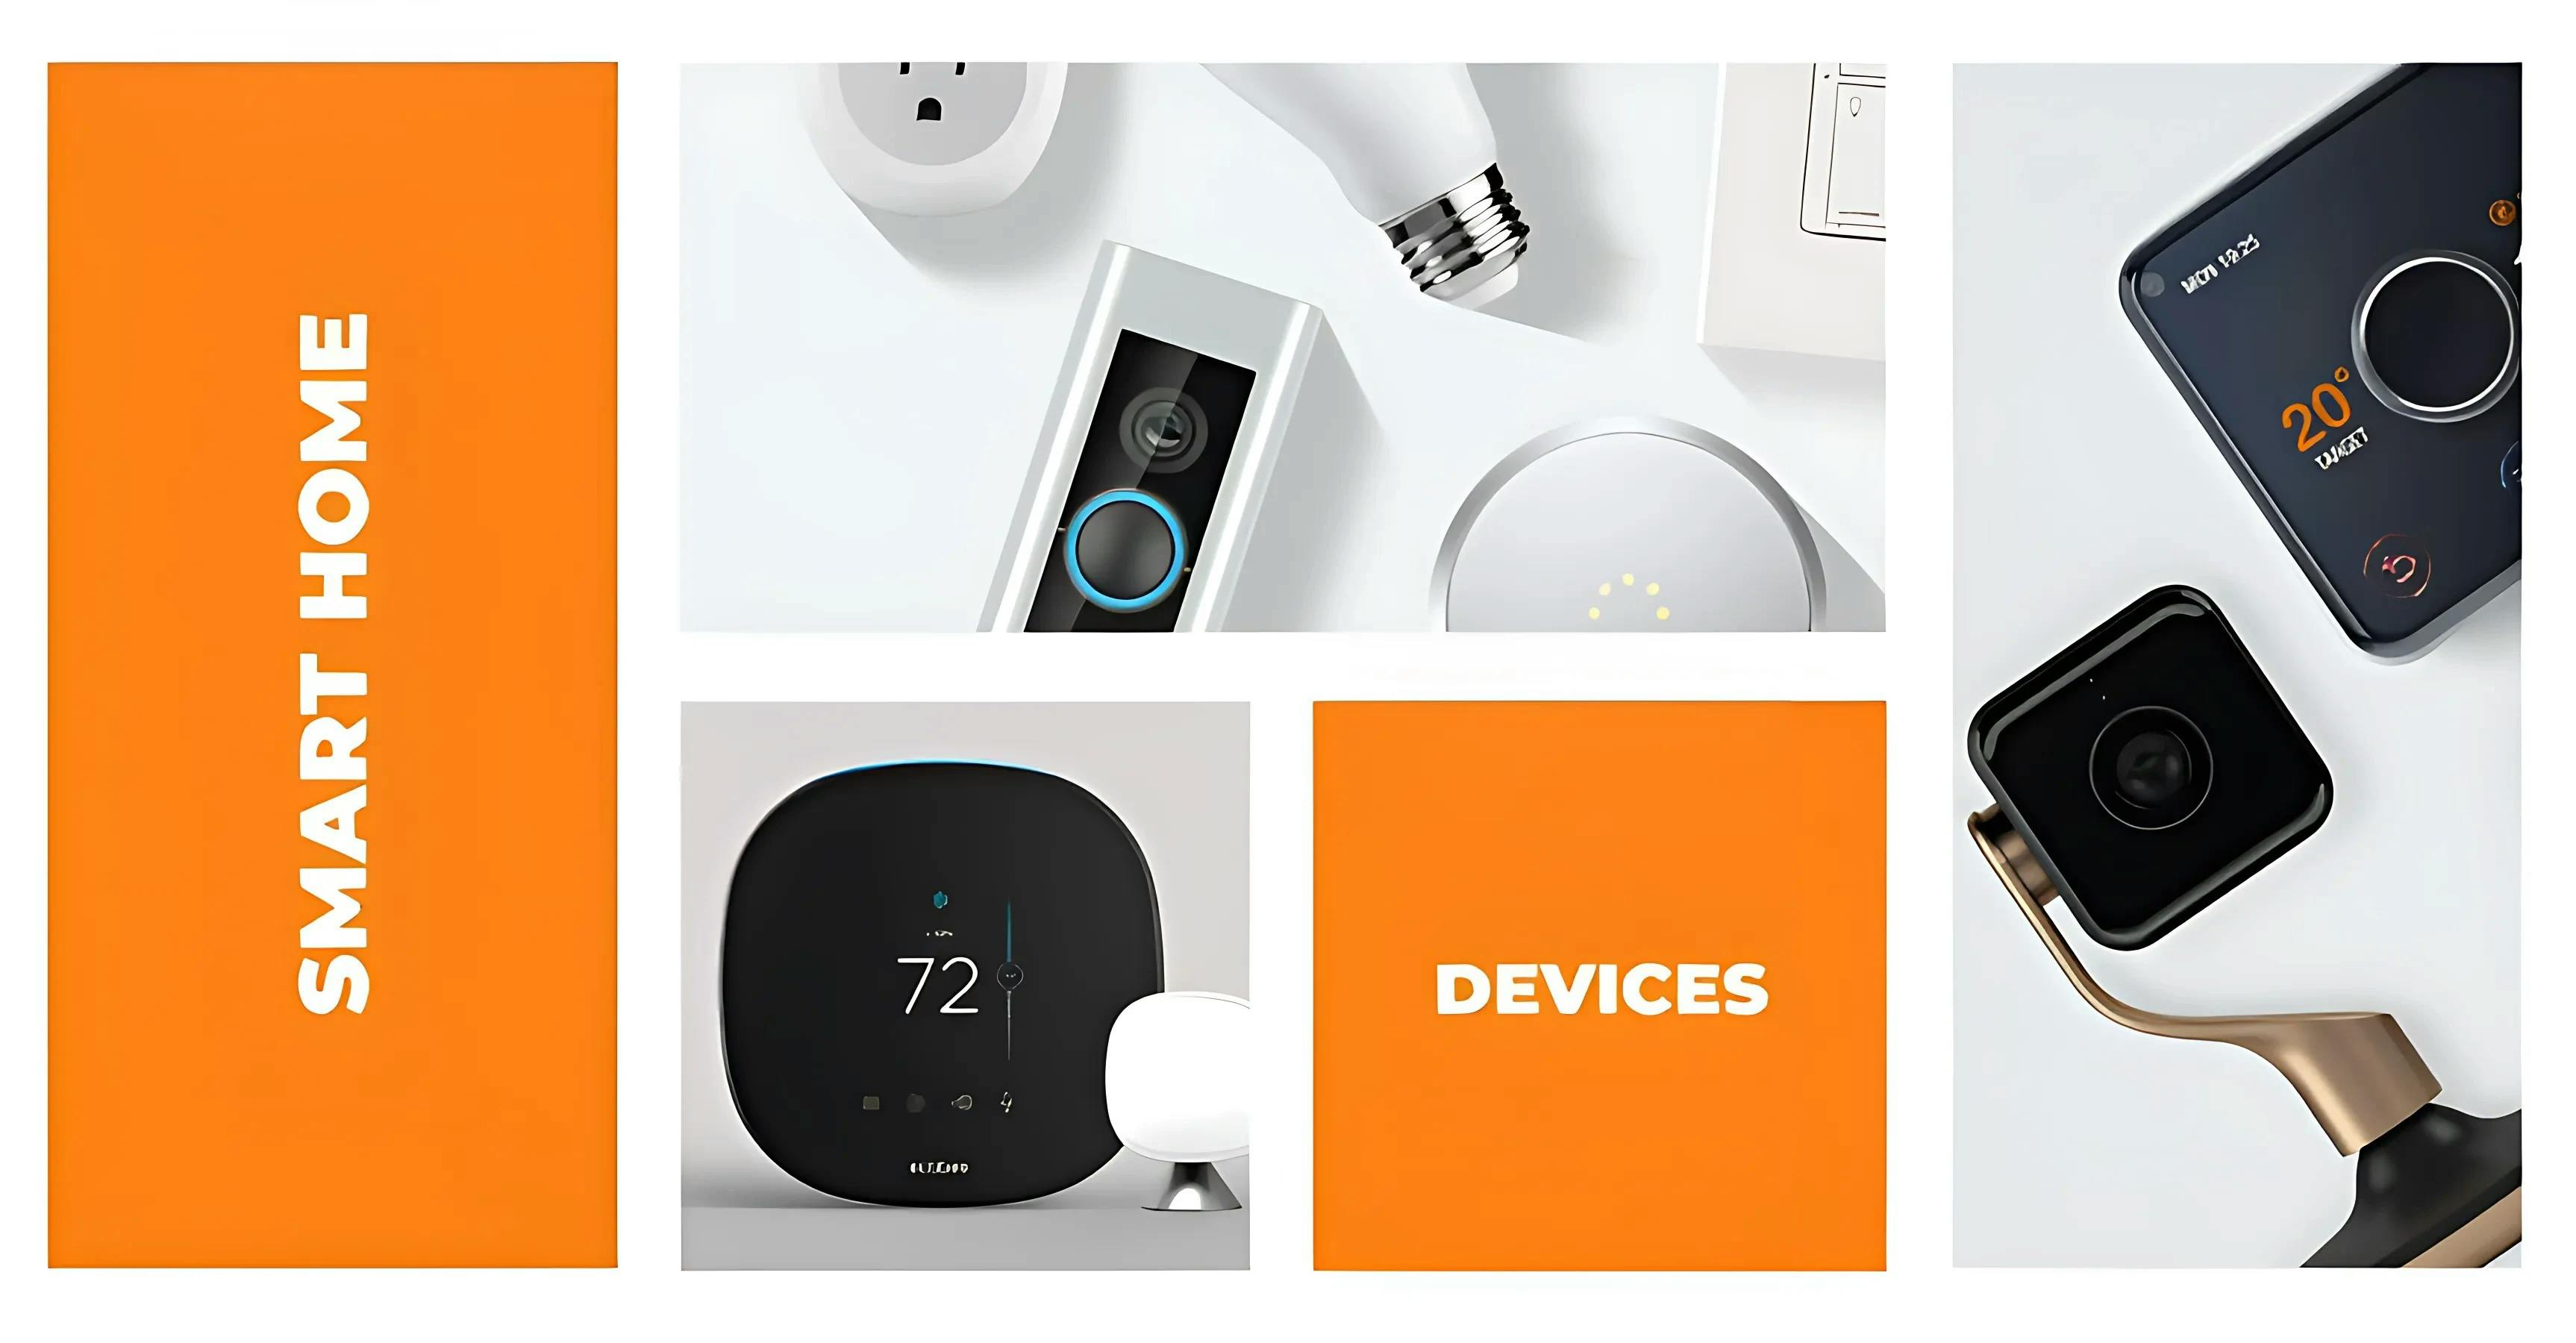 top 5 features to consider when buying a smart home device